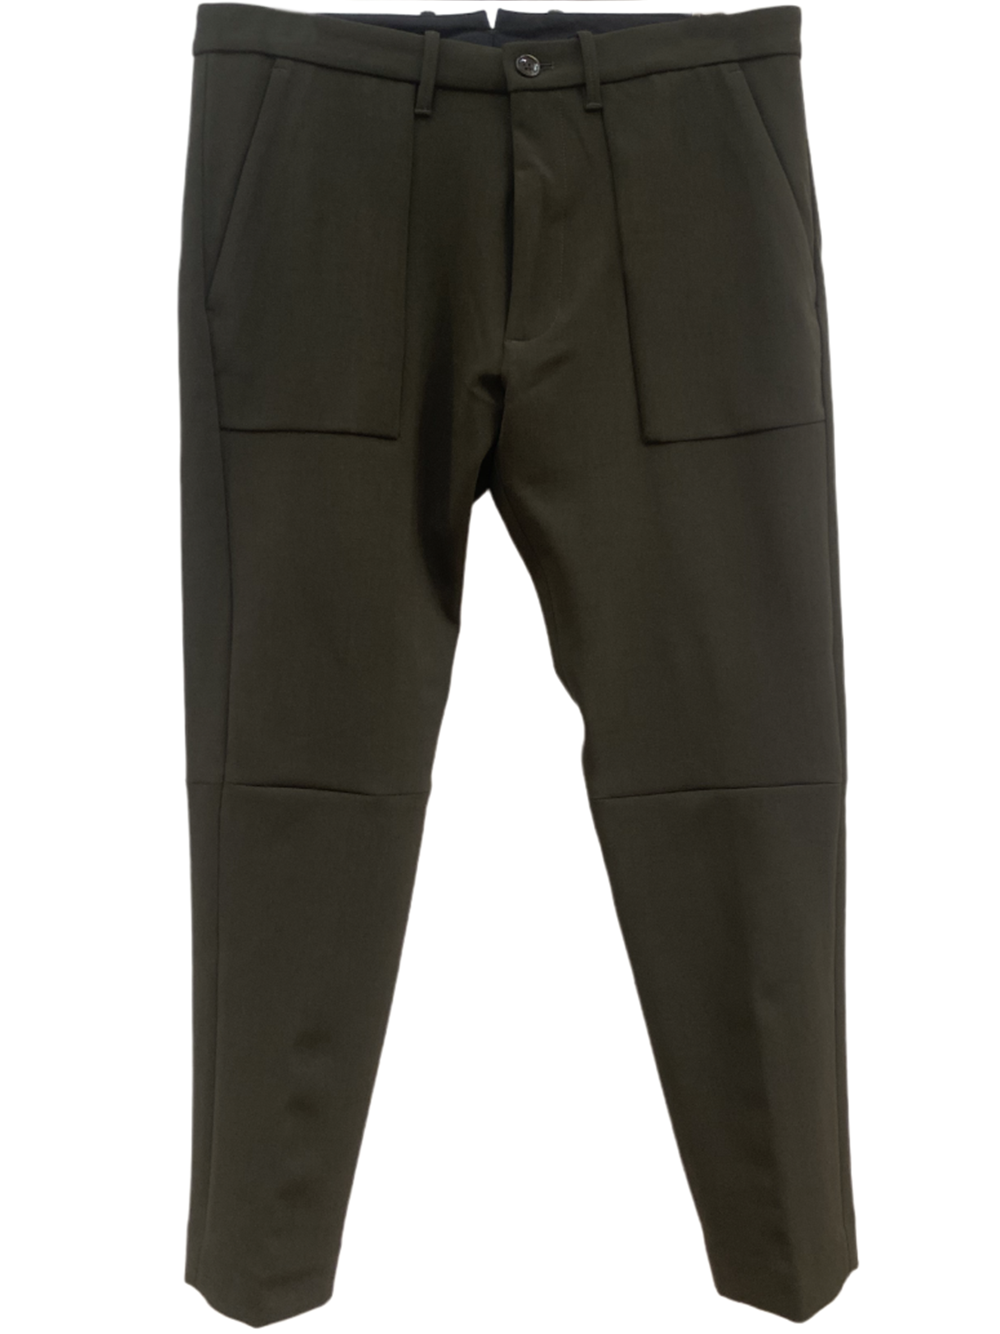 Trousers with stitching details